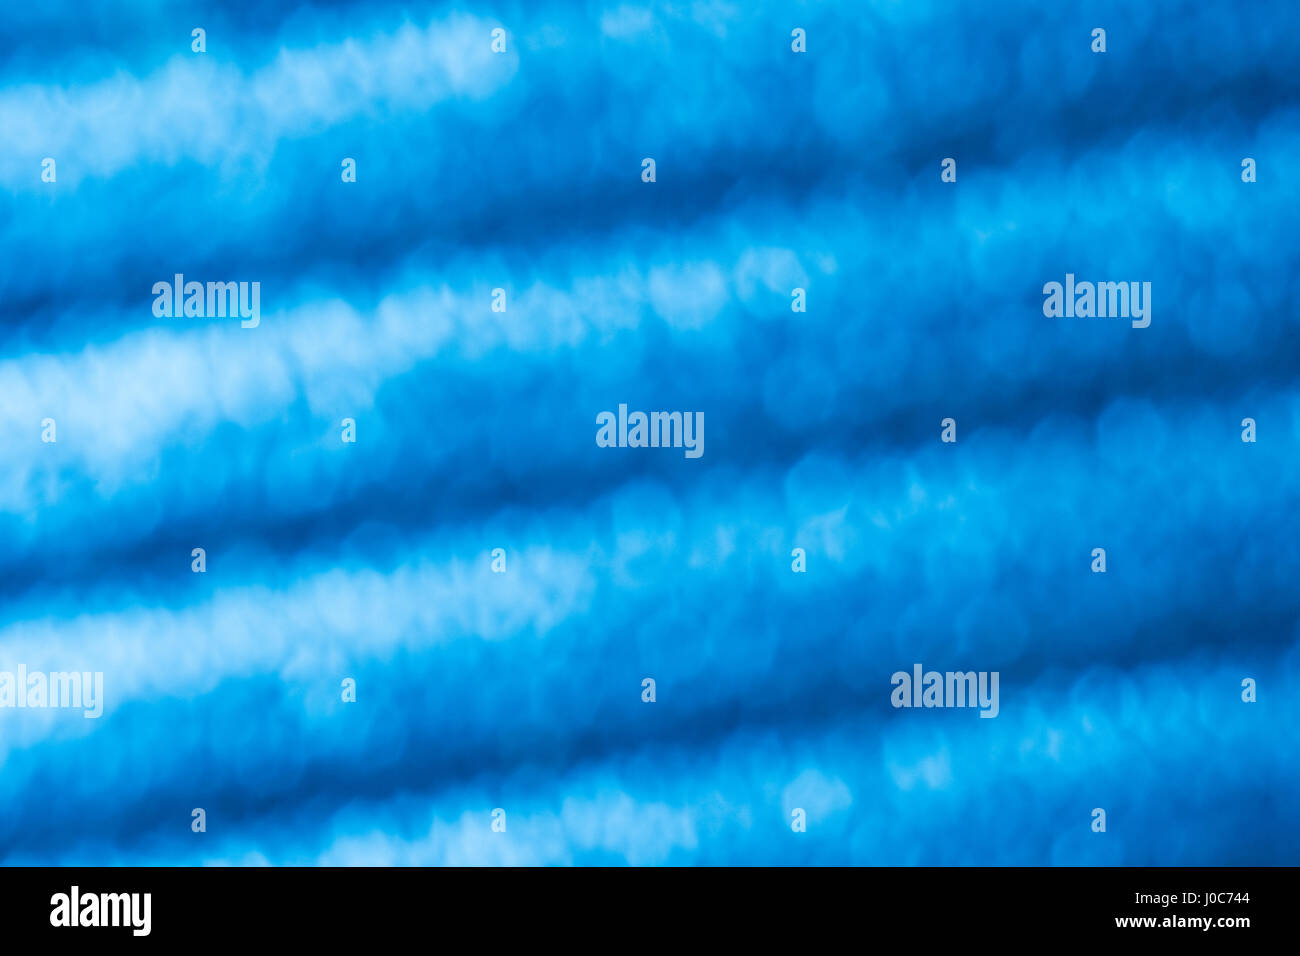 Abstract blue background with possible use in technology concepts. Abstract World Water Day, Water Day metaphor. Abstract lines. Stock Photo